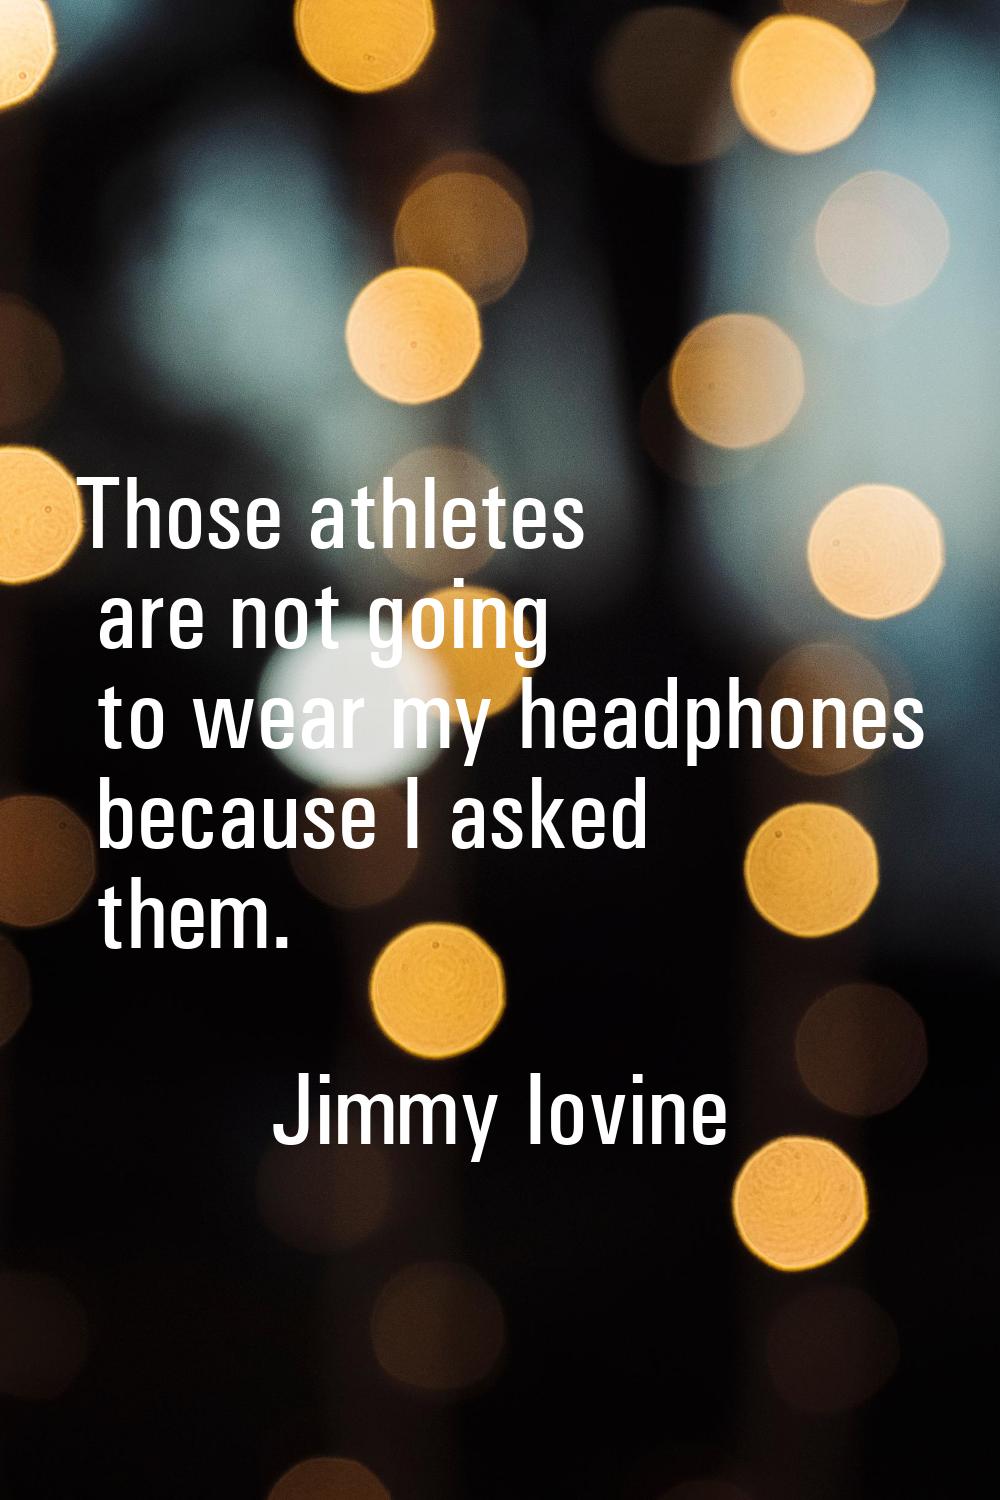 Those athletes are not going to wear my headphones because I asked them.